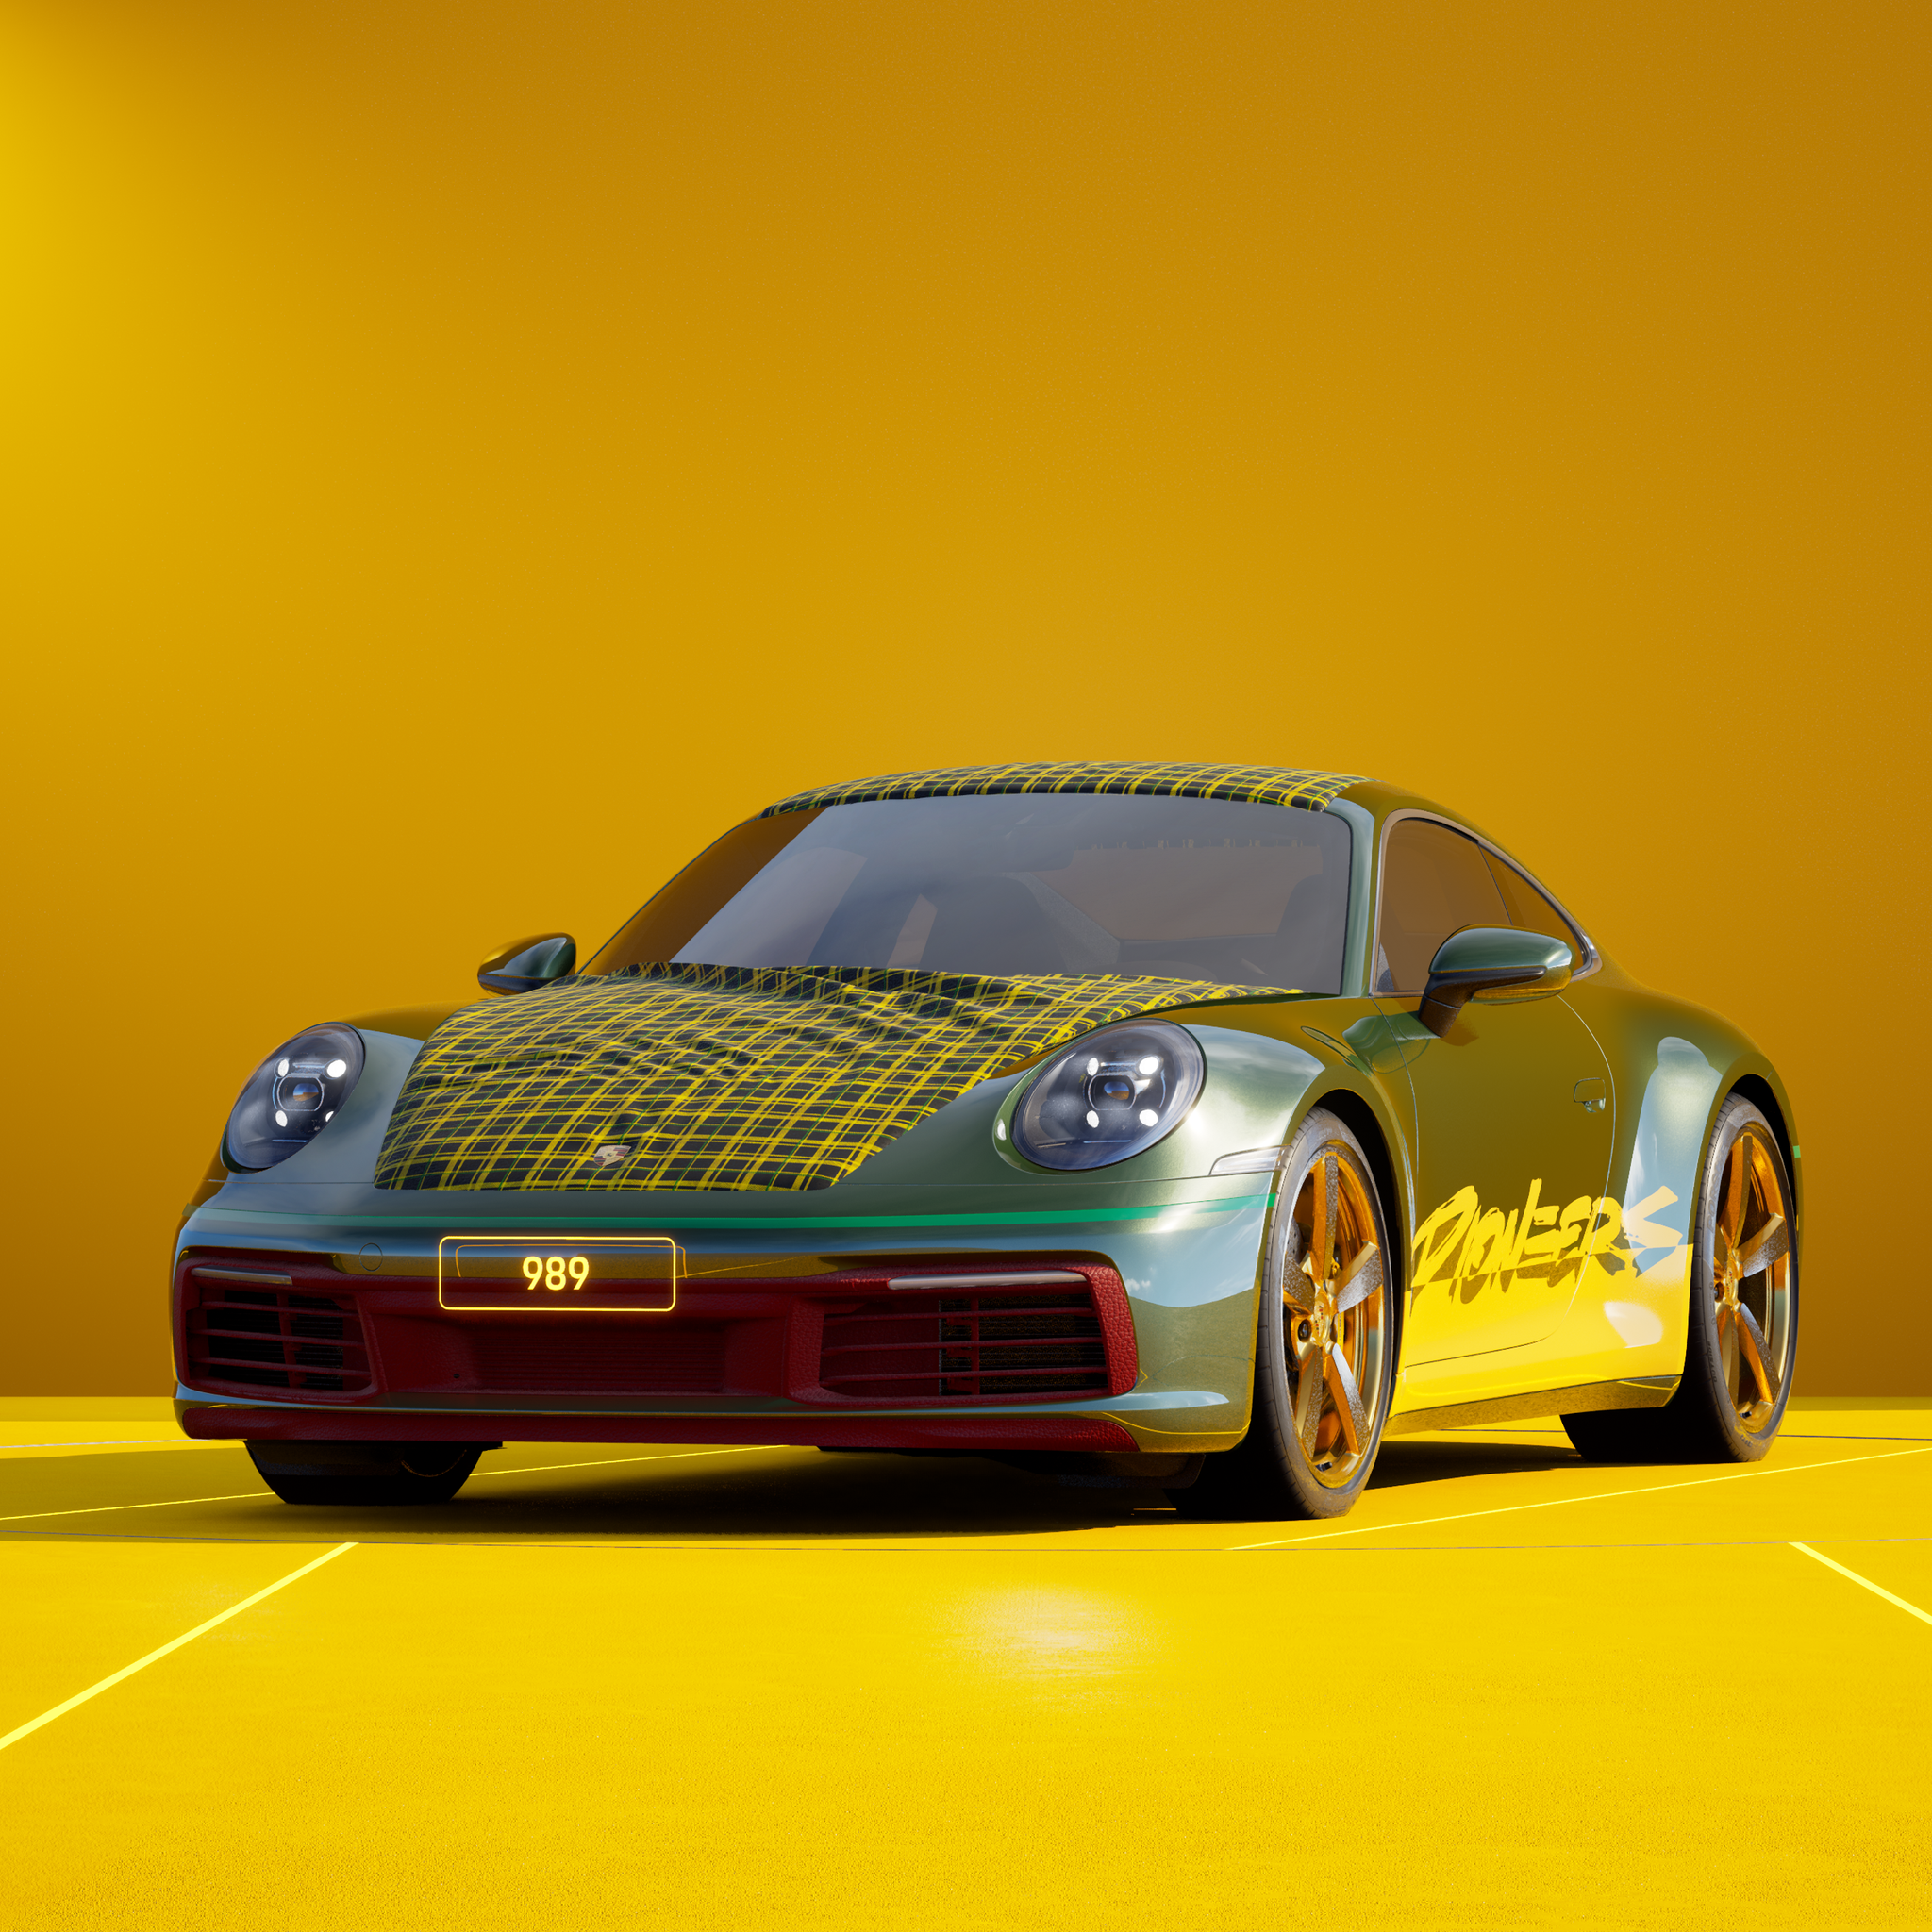 The PORSCHΞ 911 989 image in phase